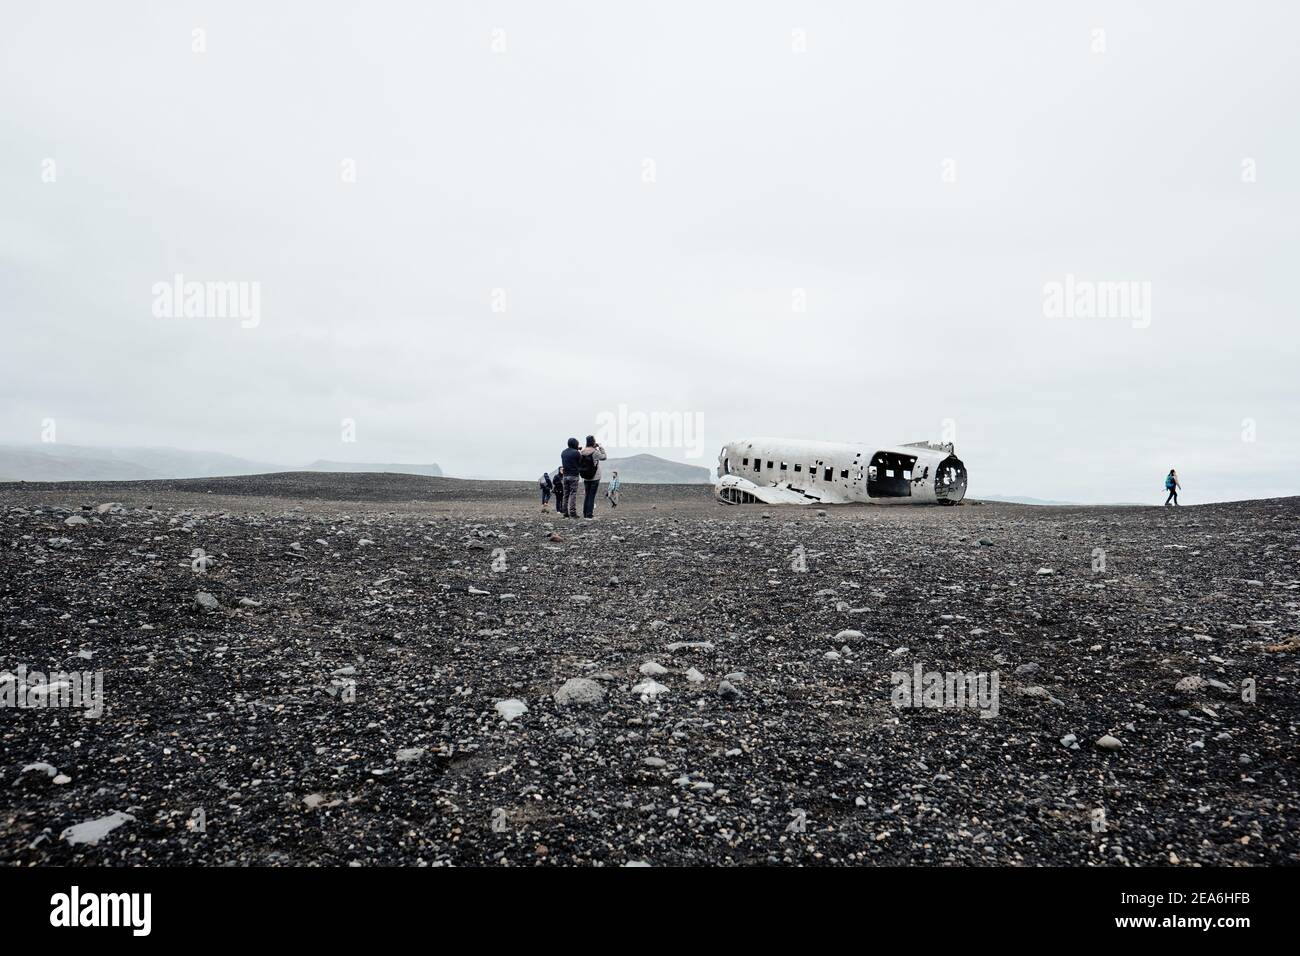 Tourist hikers to the remote and eerie Dakota plane wreckage in the black sand plain desert of Sólheimasandur in south Iceland. Stock Photo